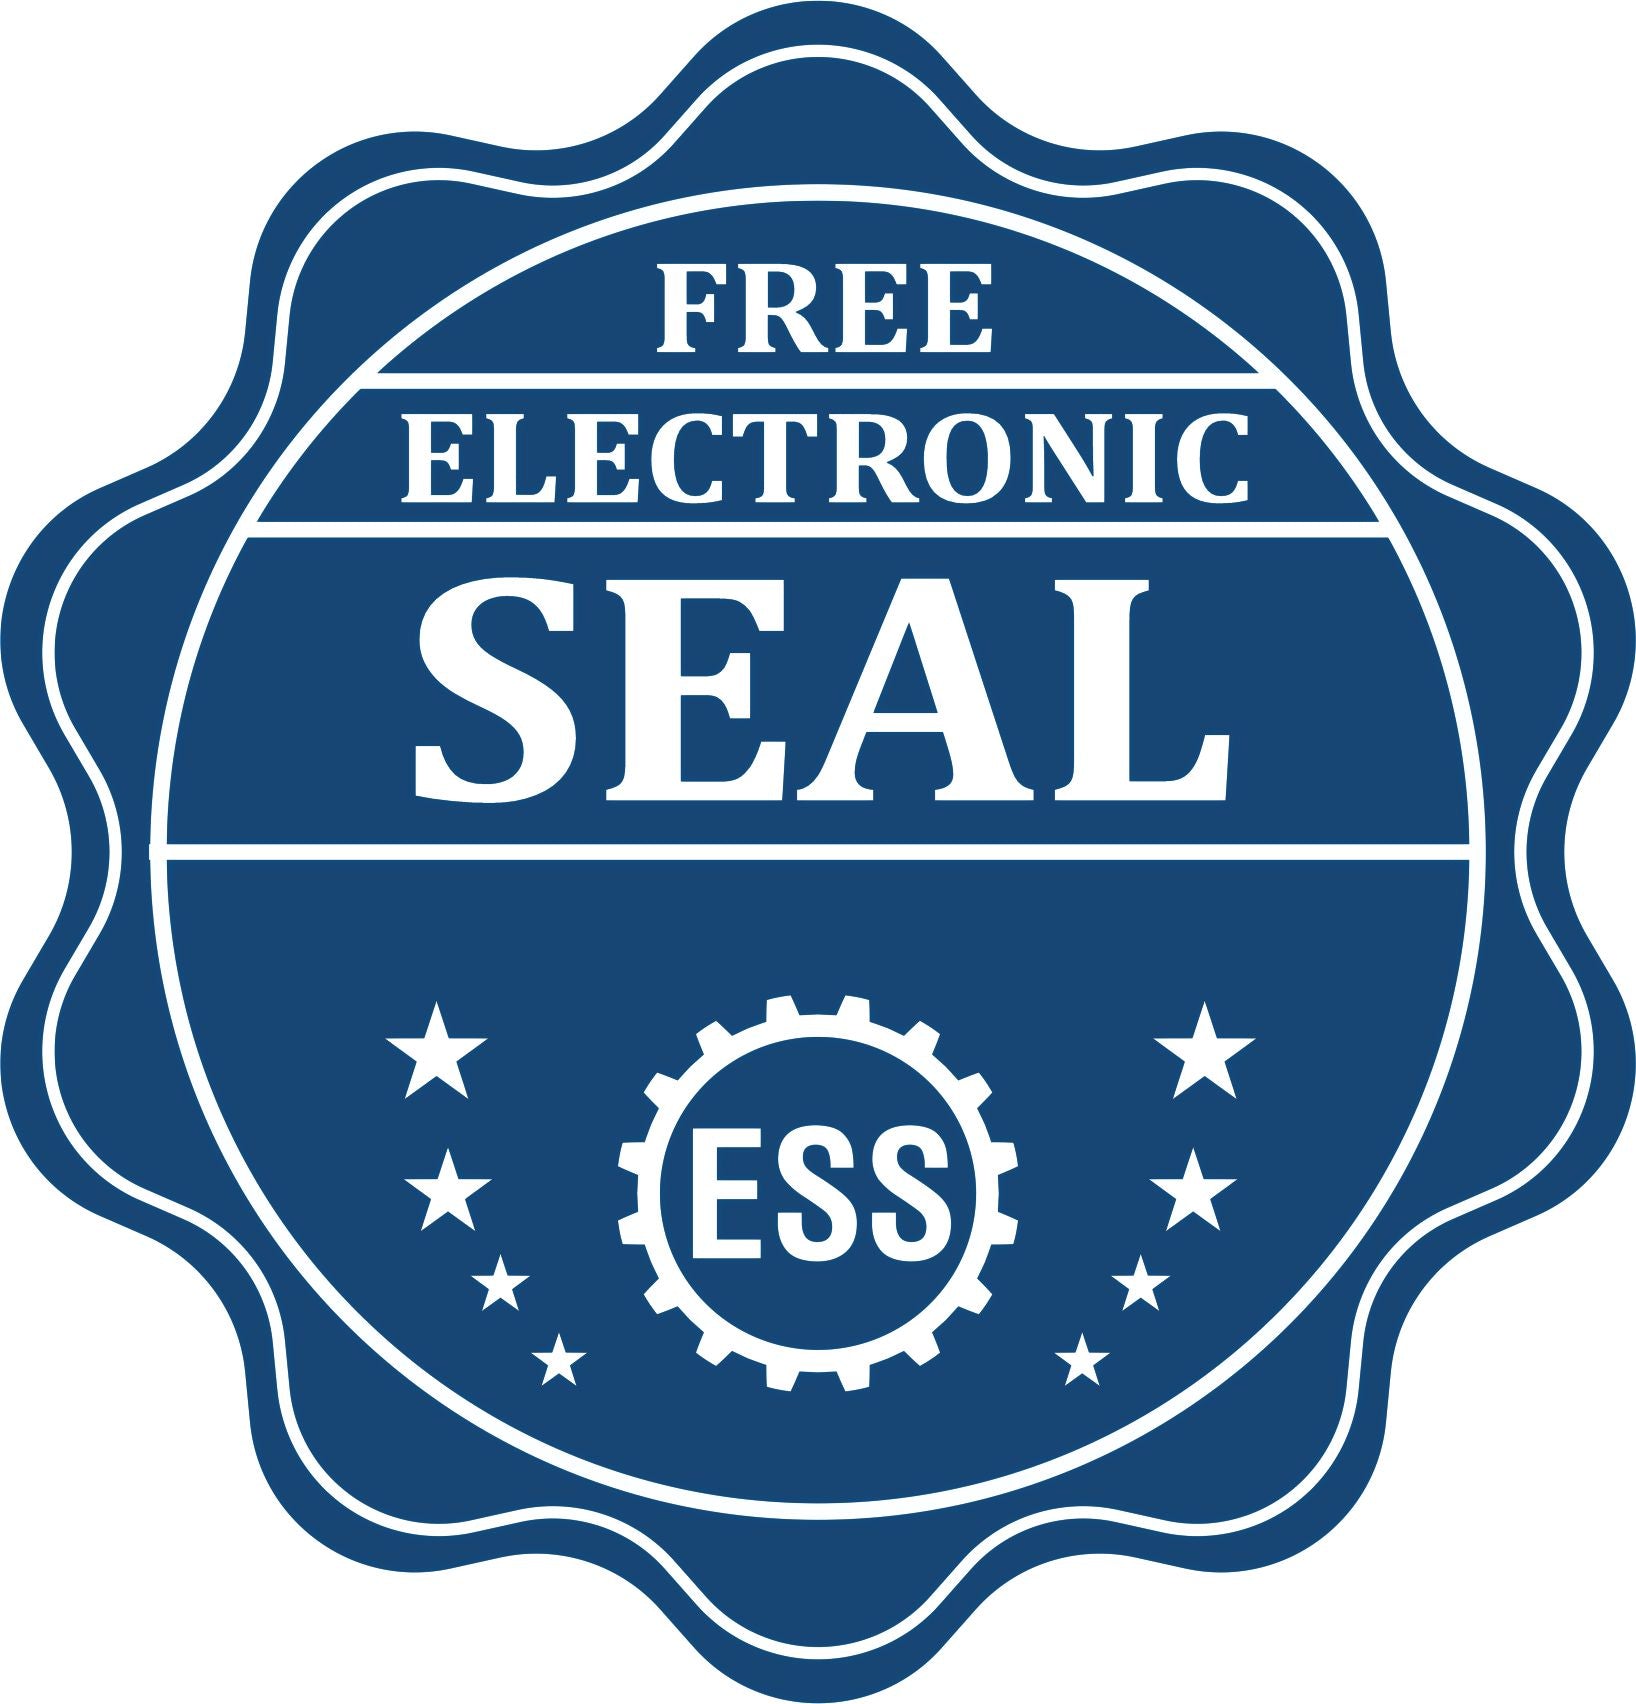 A badge showing a free electronic seal for the Slim Pre-Inked Tennessee Land Surveyor Seal Stamp with stars and the ESS gear on the emblem.